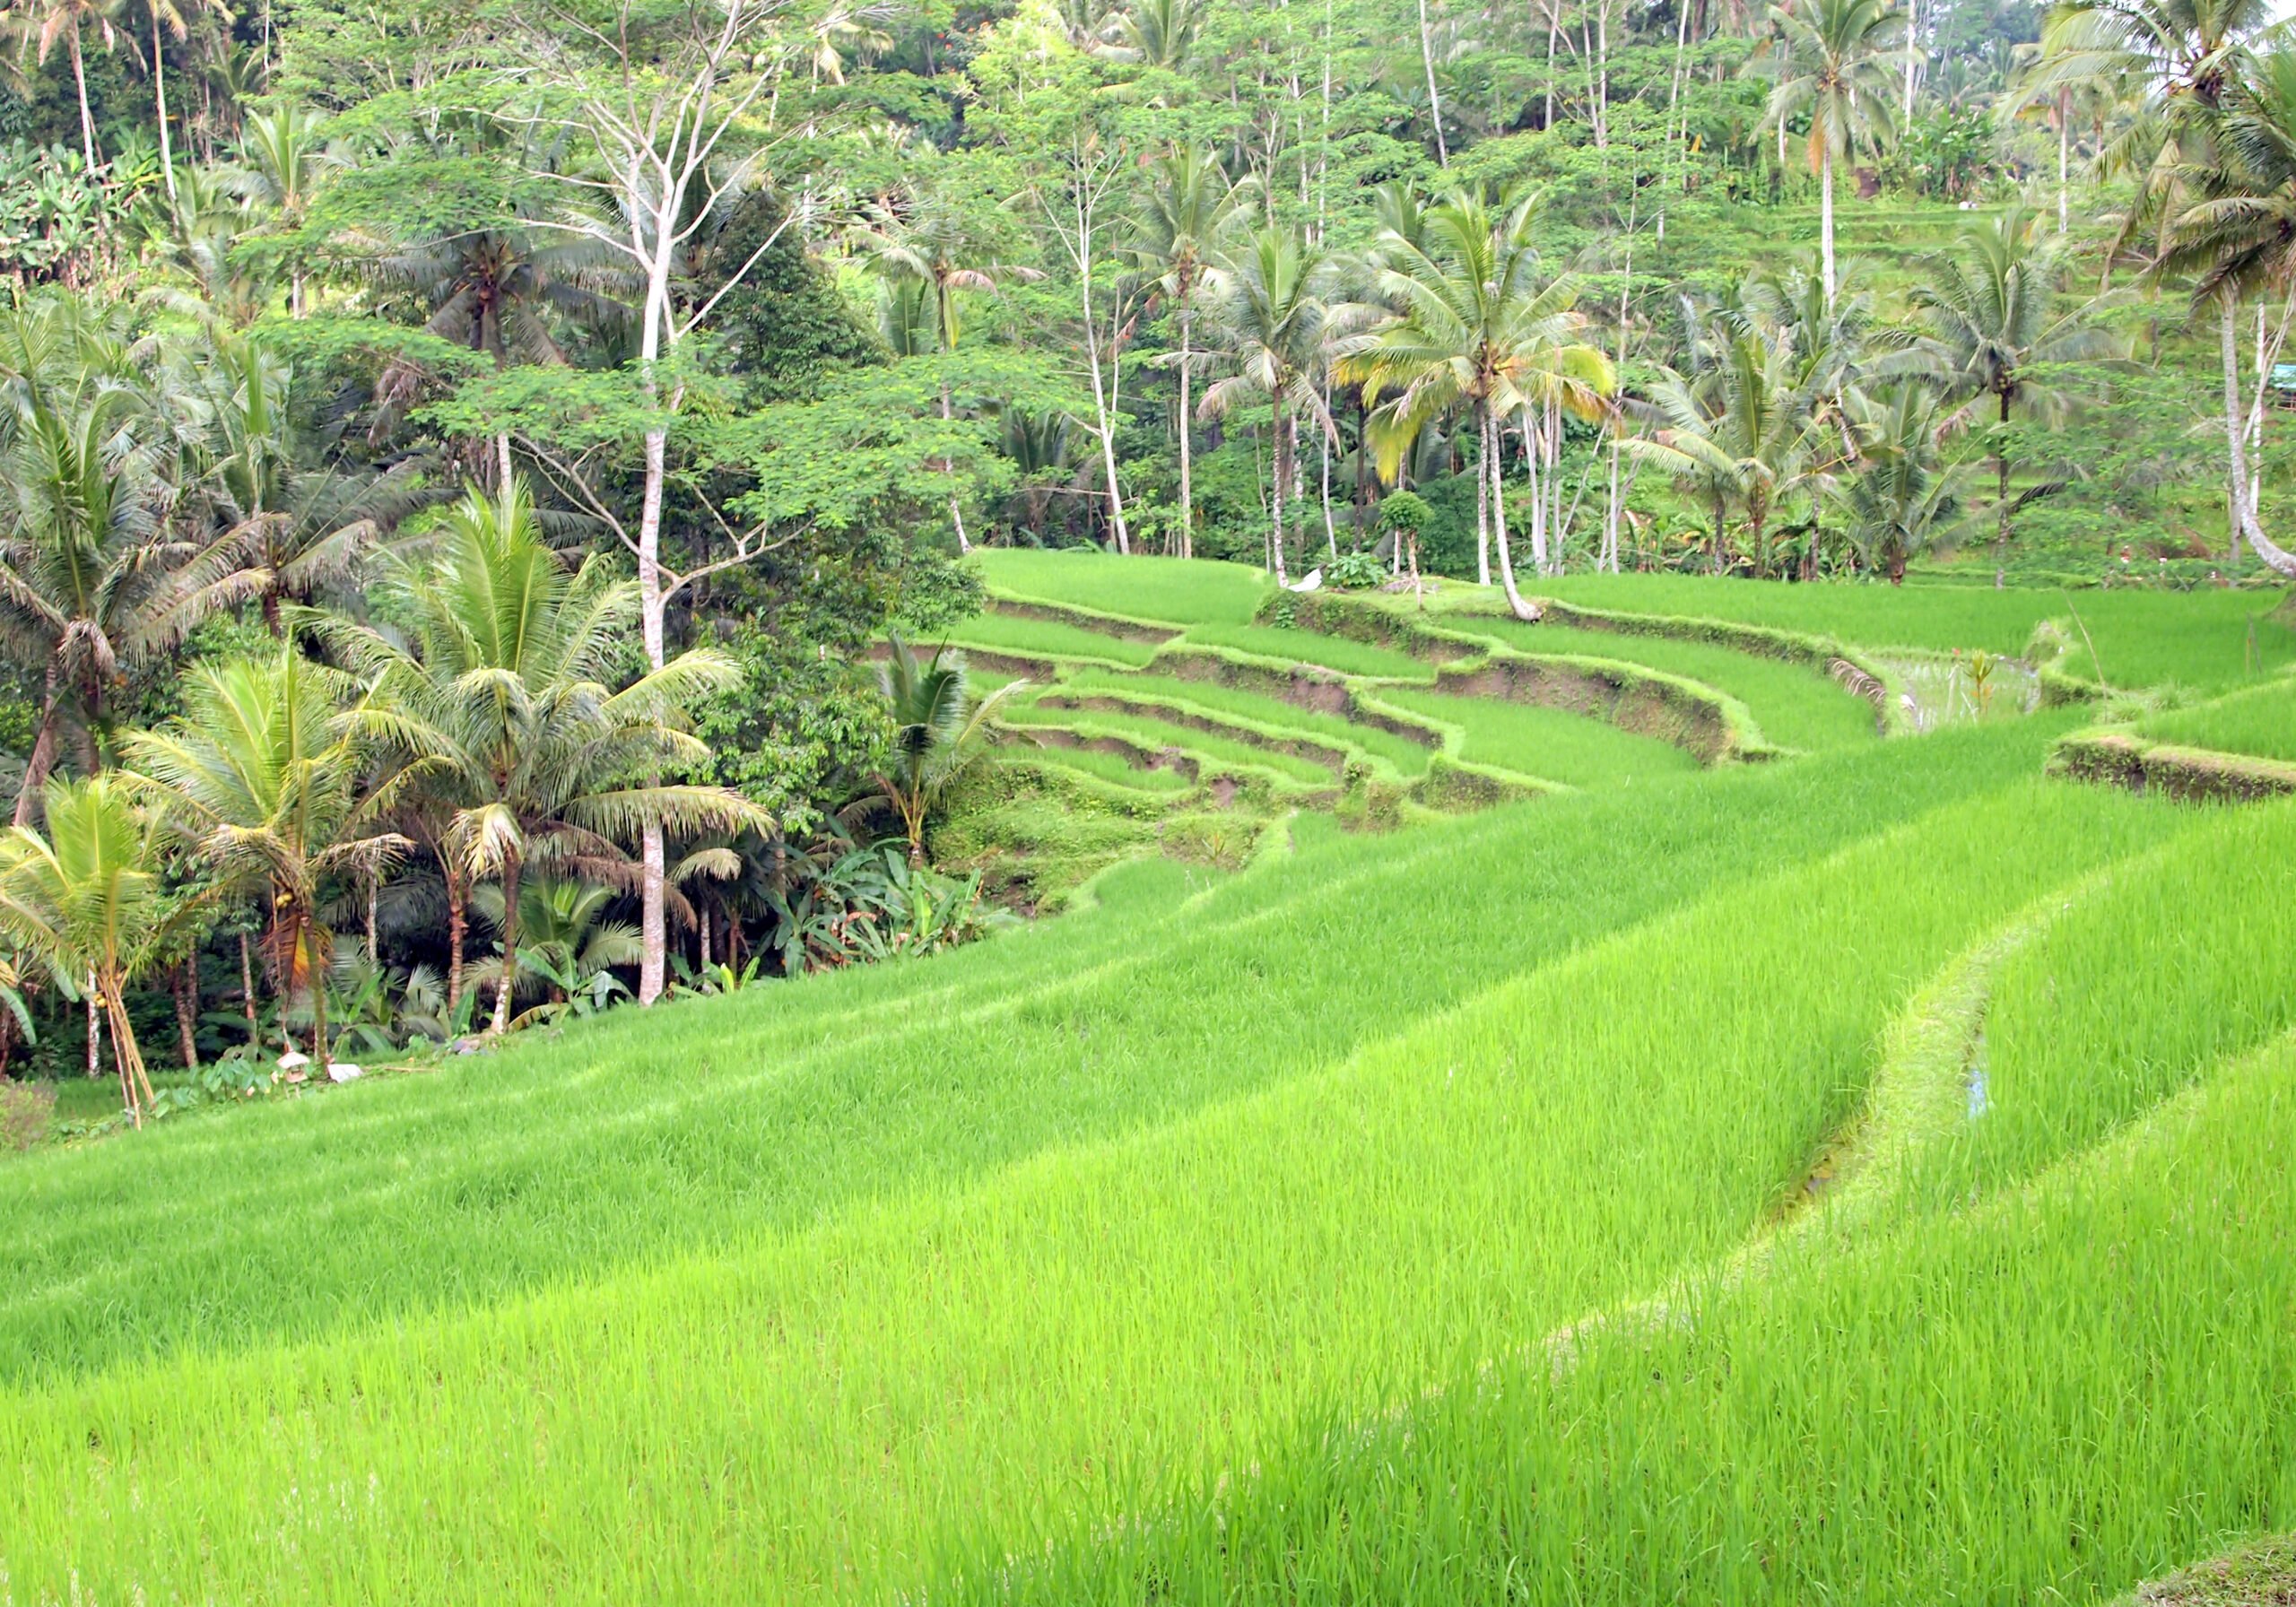 See The Beautiful Rice Terraces Near The Gunung Kawi Temple On The Bali Culture Tour